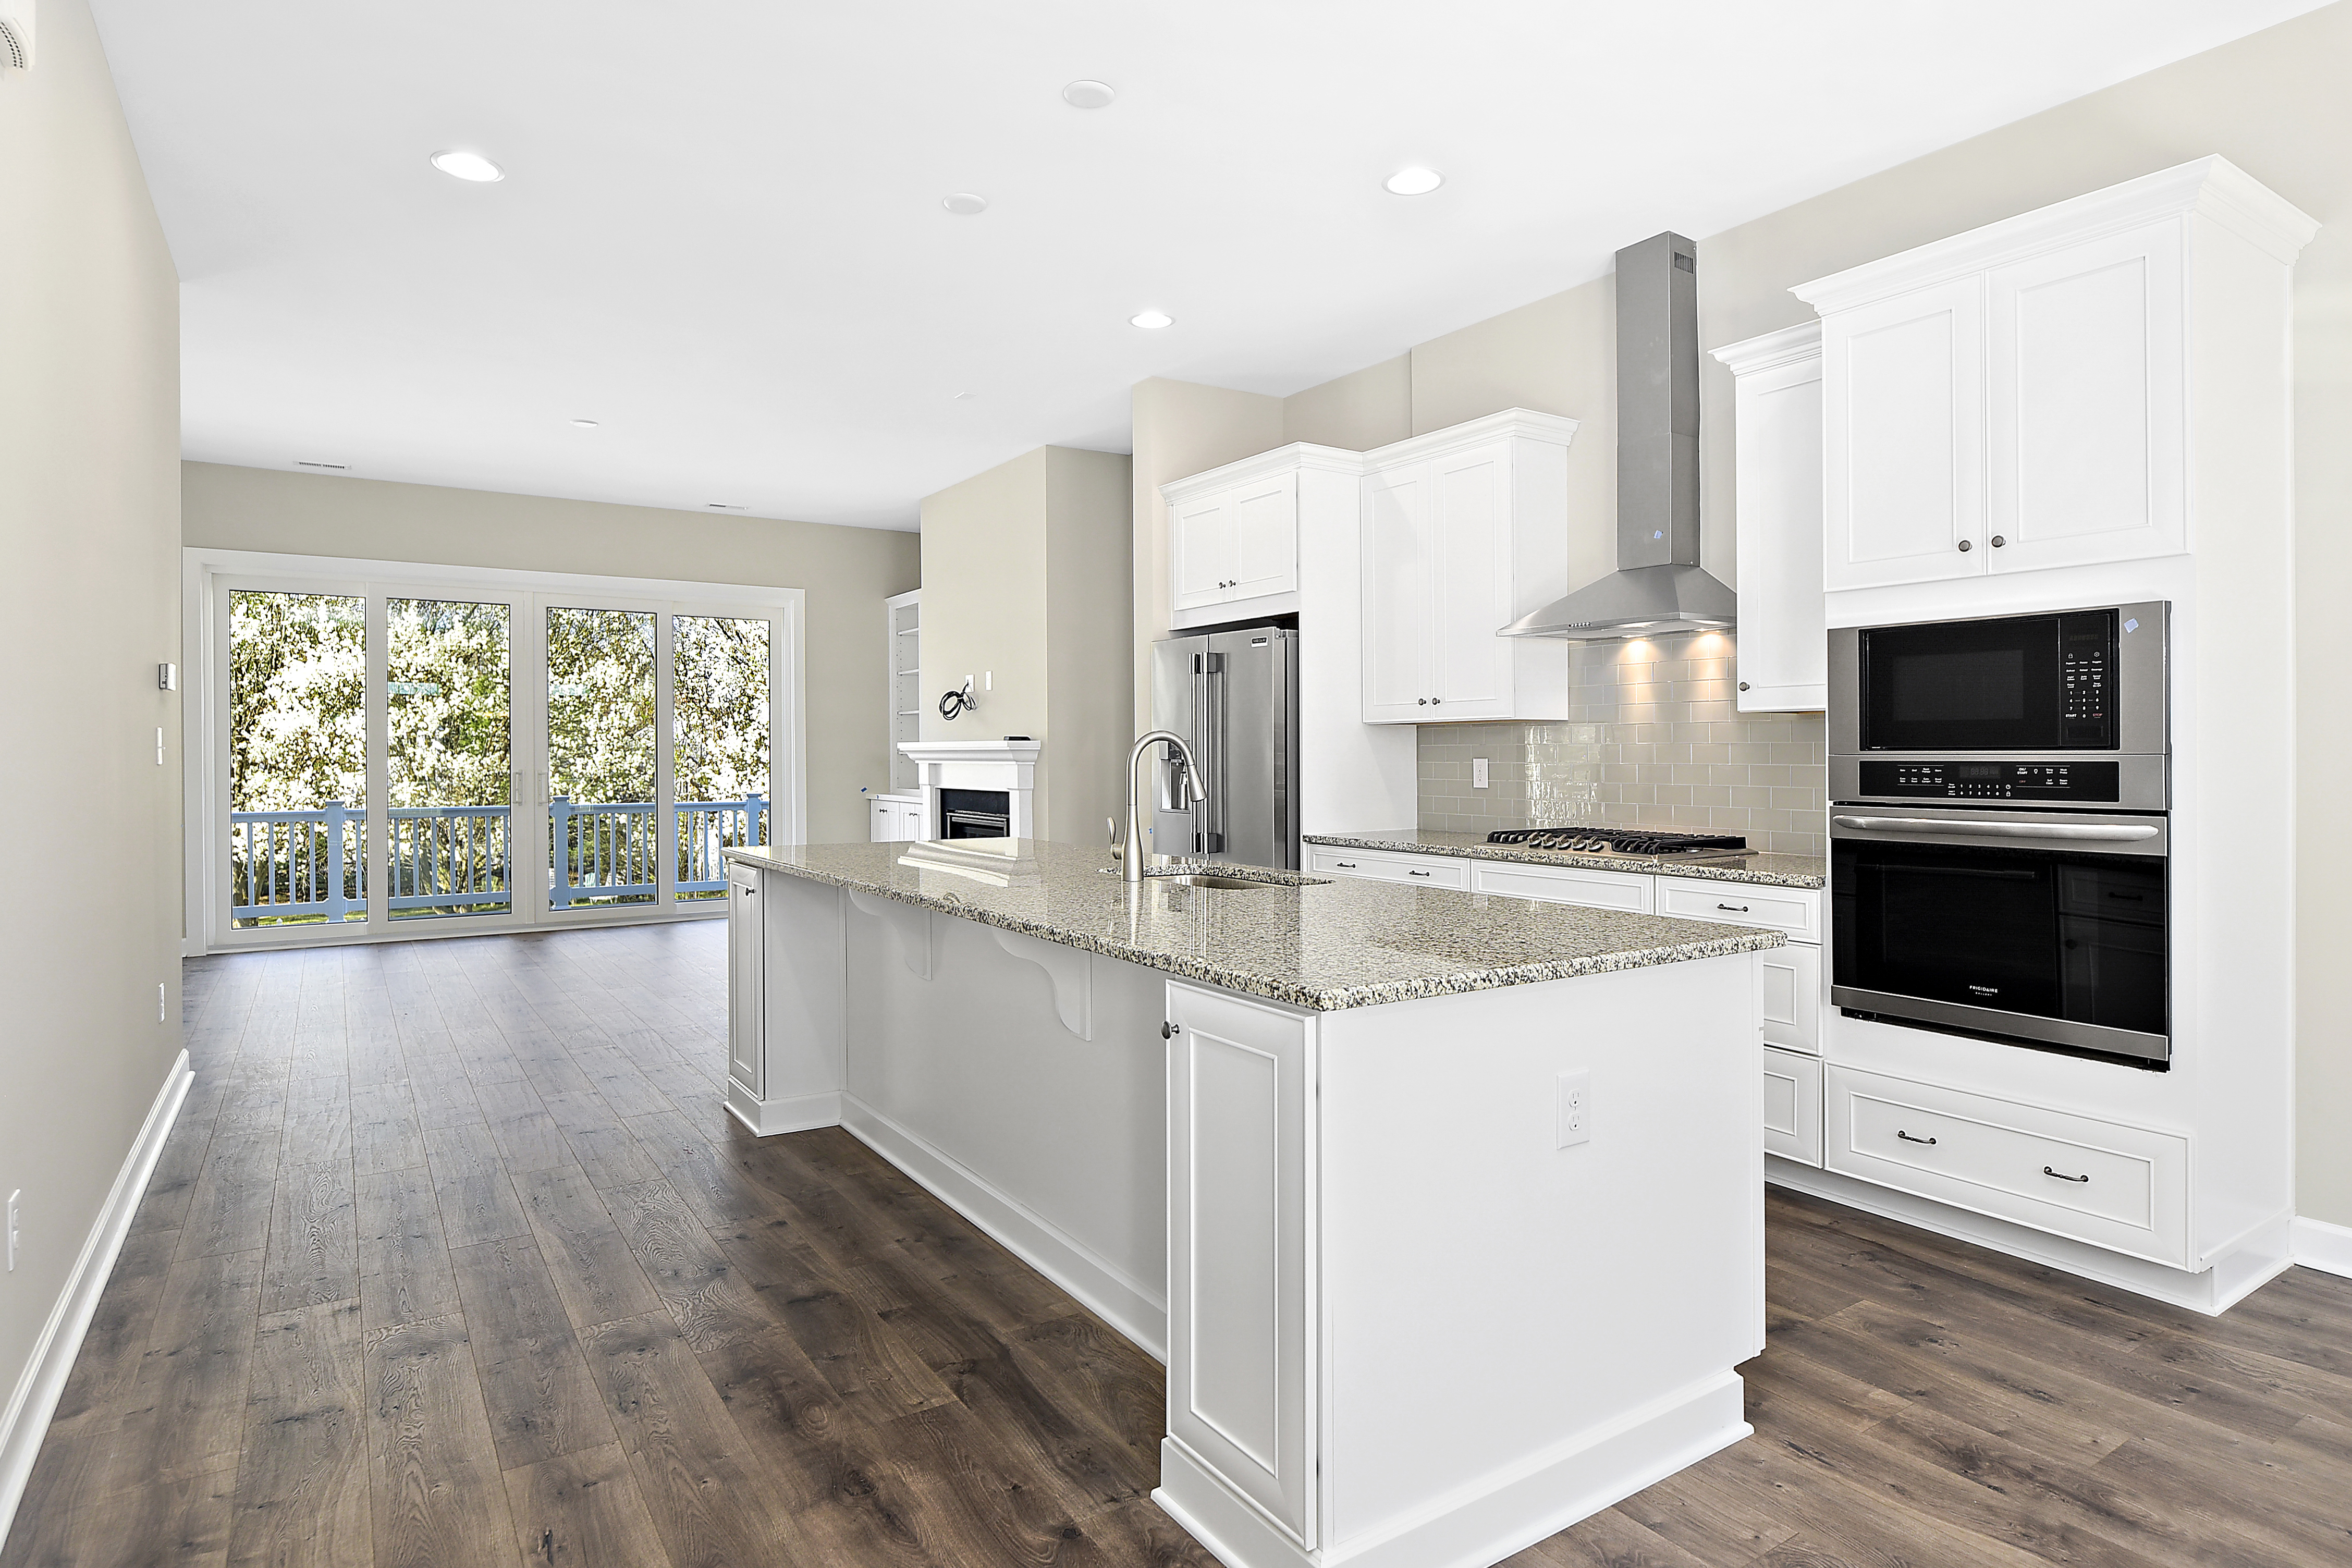 Large kitchen island in open floorplan of Turnstone home, with white cabinets and hardwood flooring